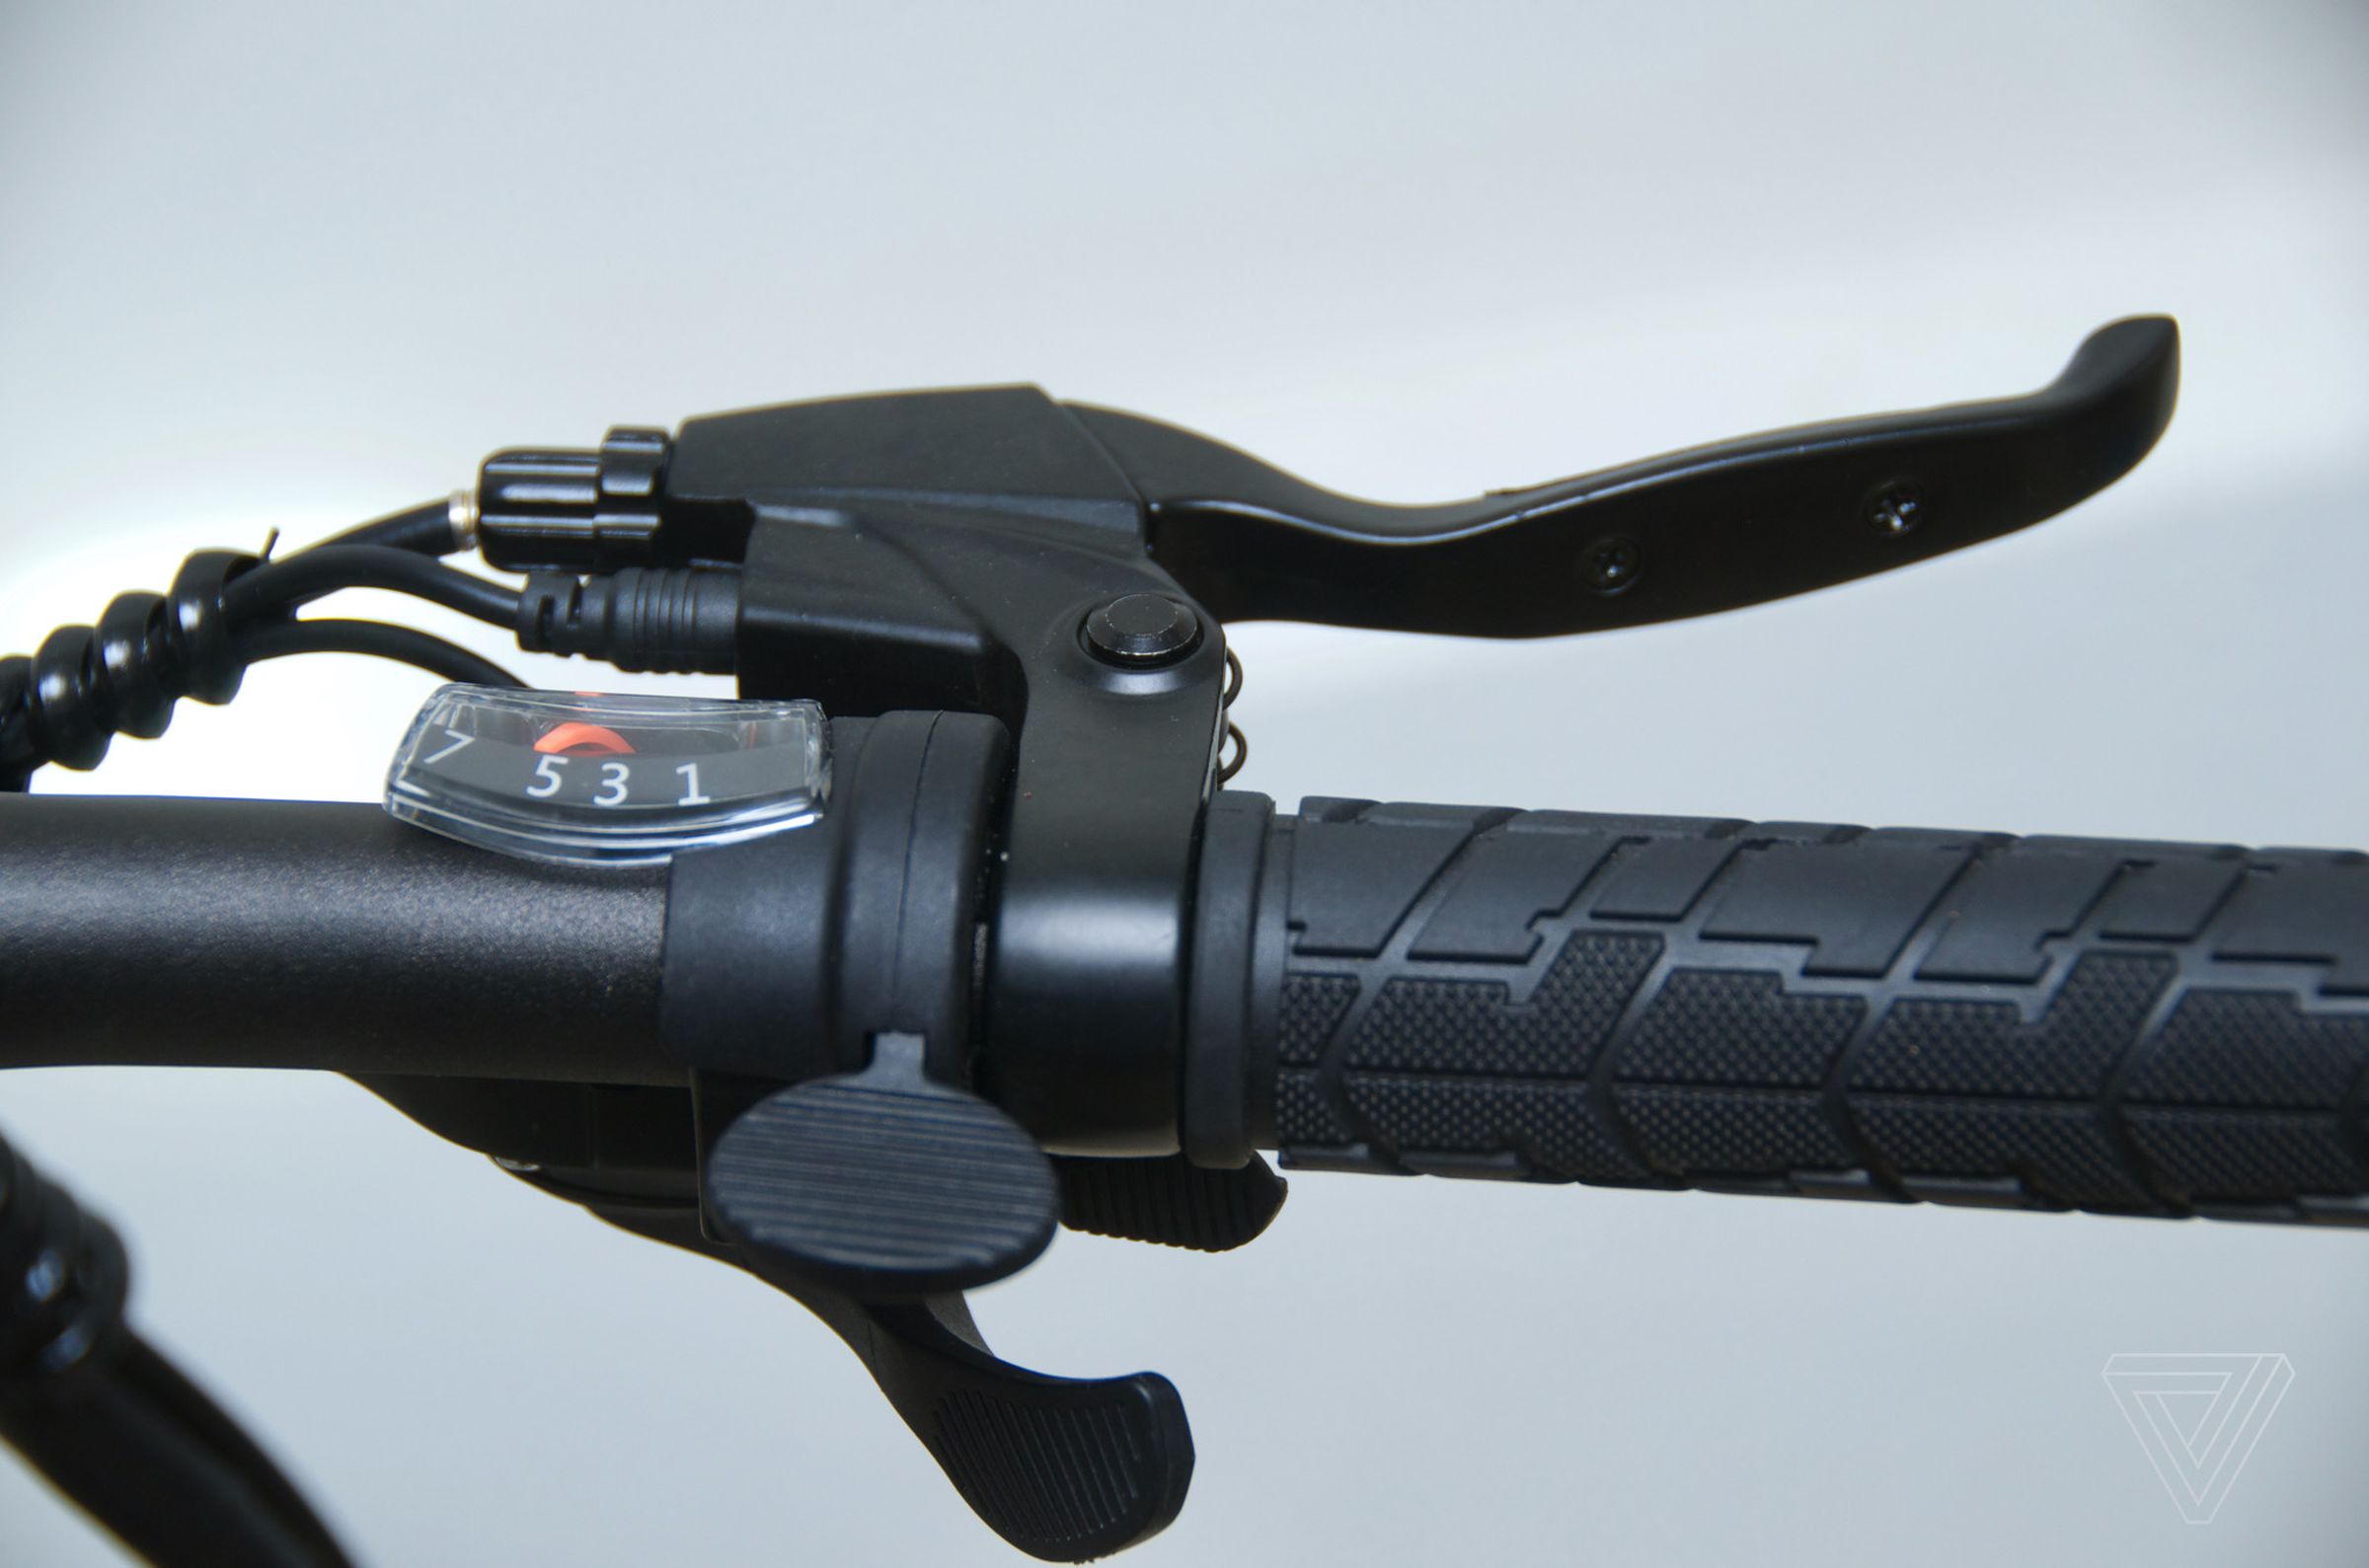 The paddle switch with ridges is the throttle.